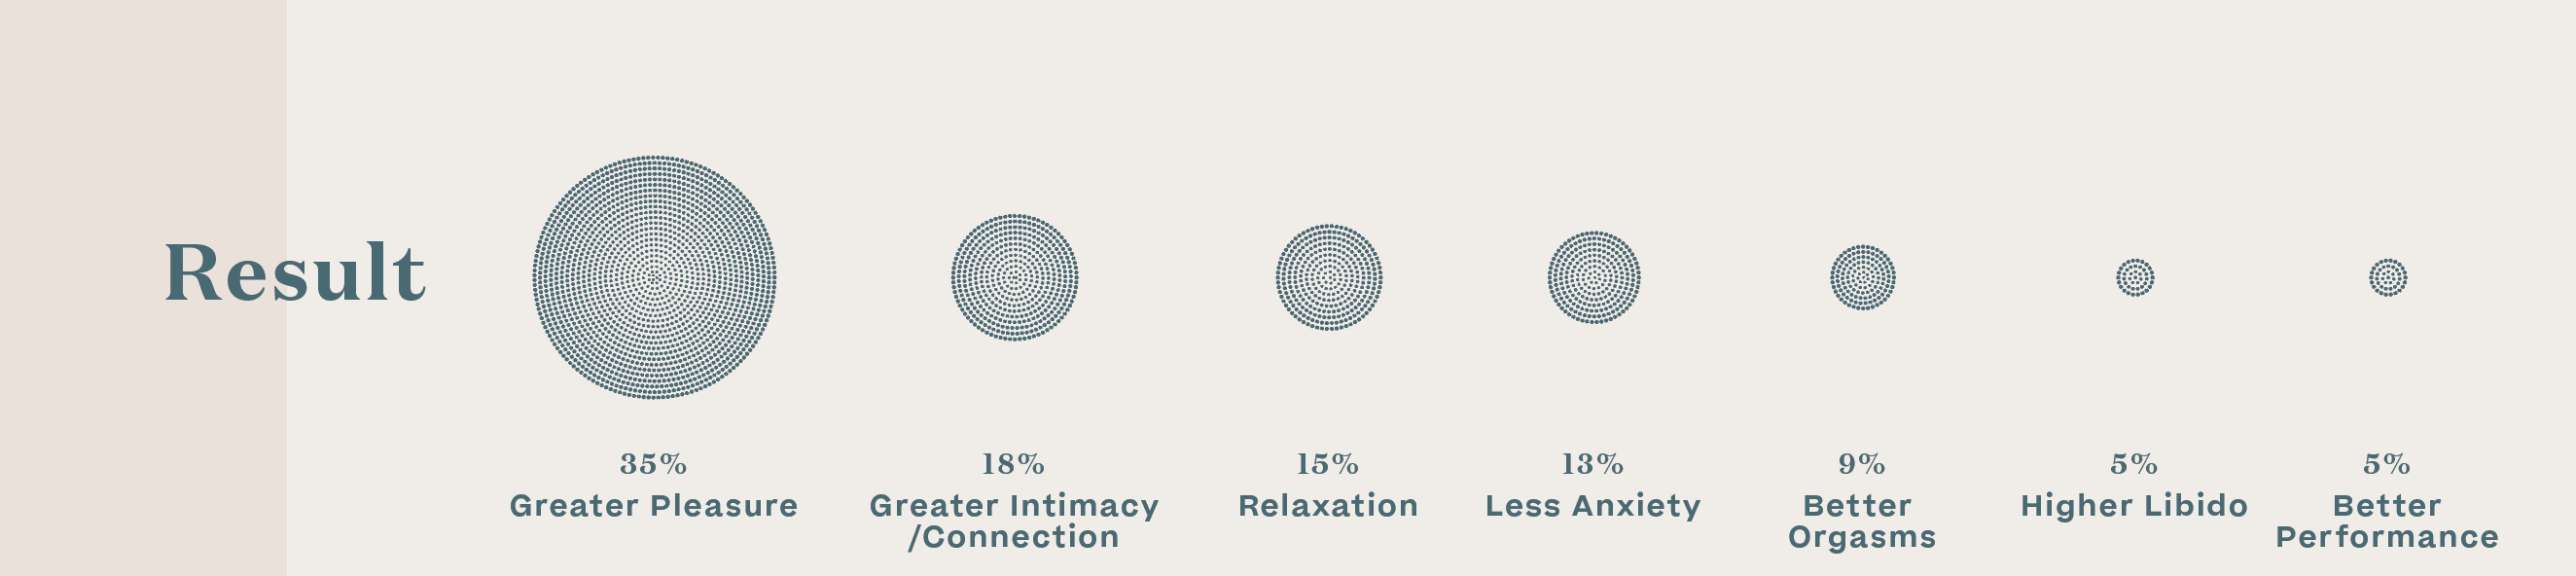 Why We Use Cannabis with Sex Study - Results - Goldleaf